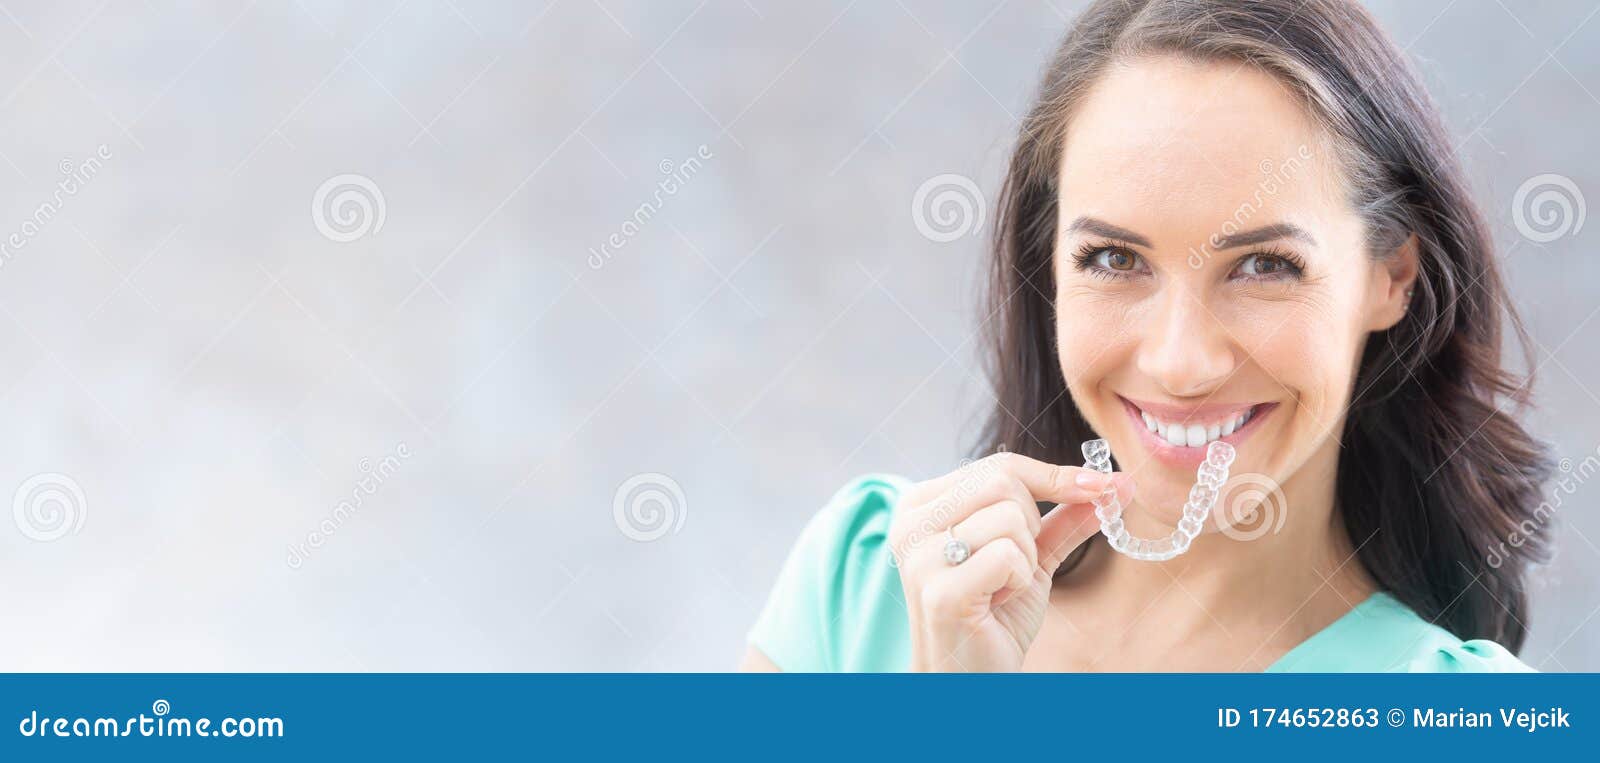 invisalign orthodontics concept - young attractive woman holding - using invisible braces or trainer